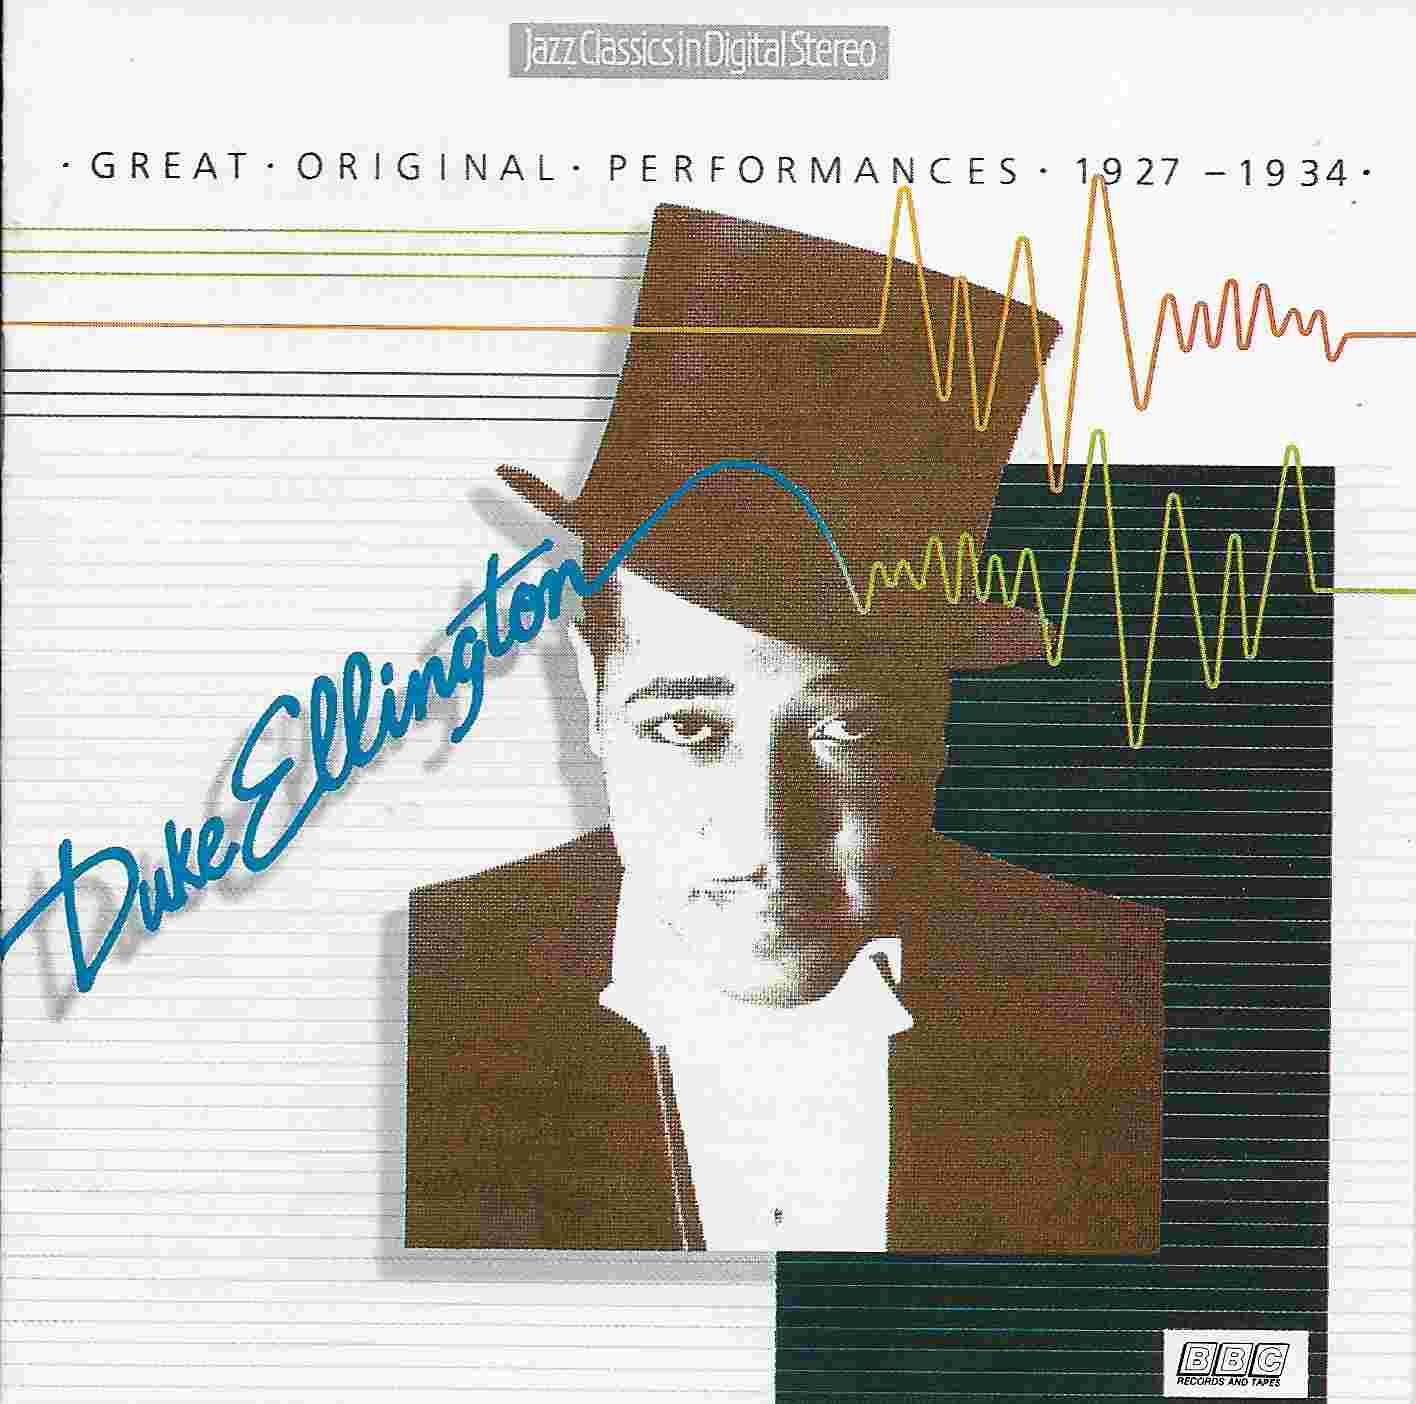 Picture of Jazz classics - Duke Ellington by artist Duke Ellington from the BBC cds - Records and Tapes library